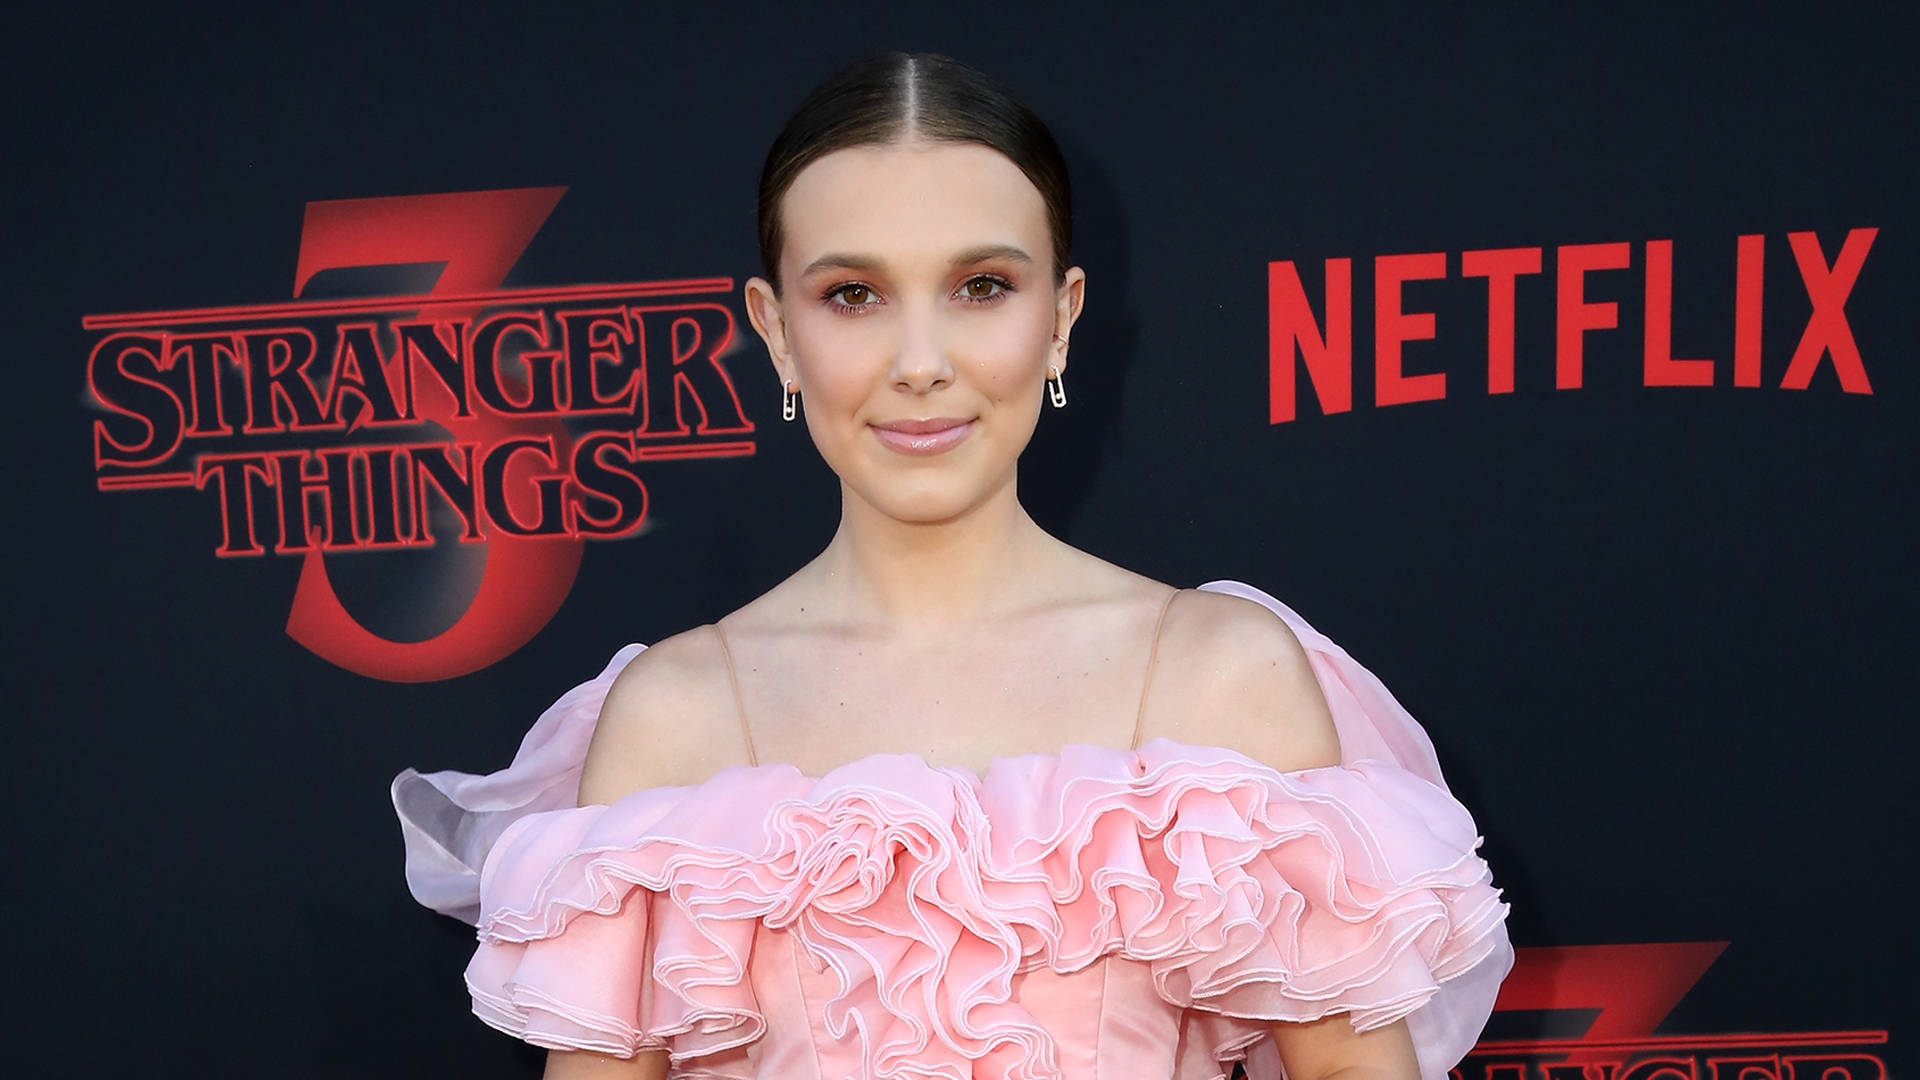 Millie Bobby Brown At The Netflix Premiere Background